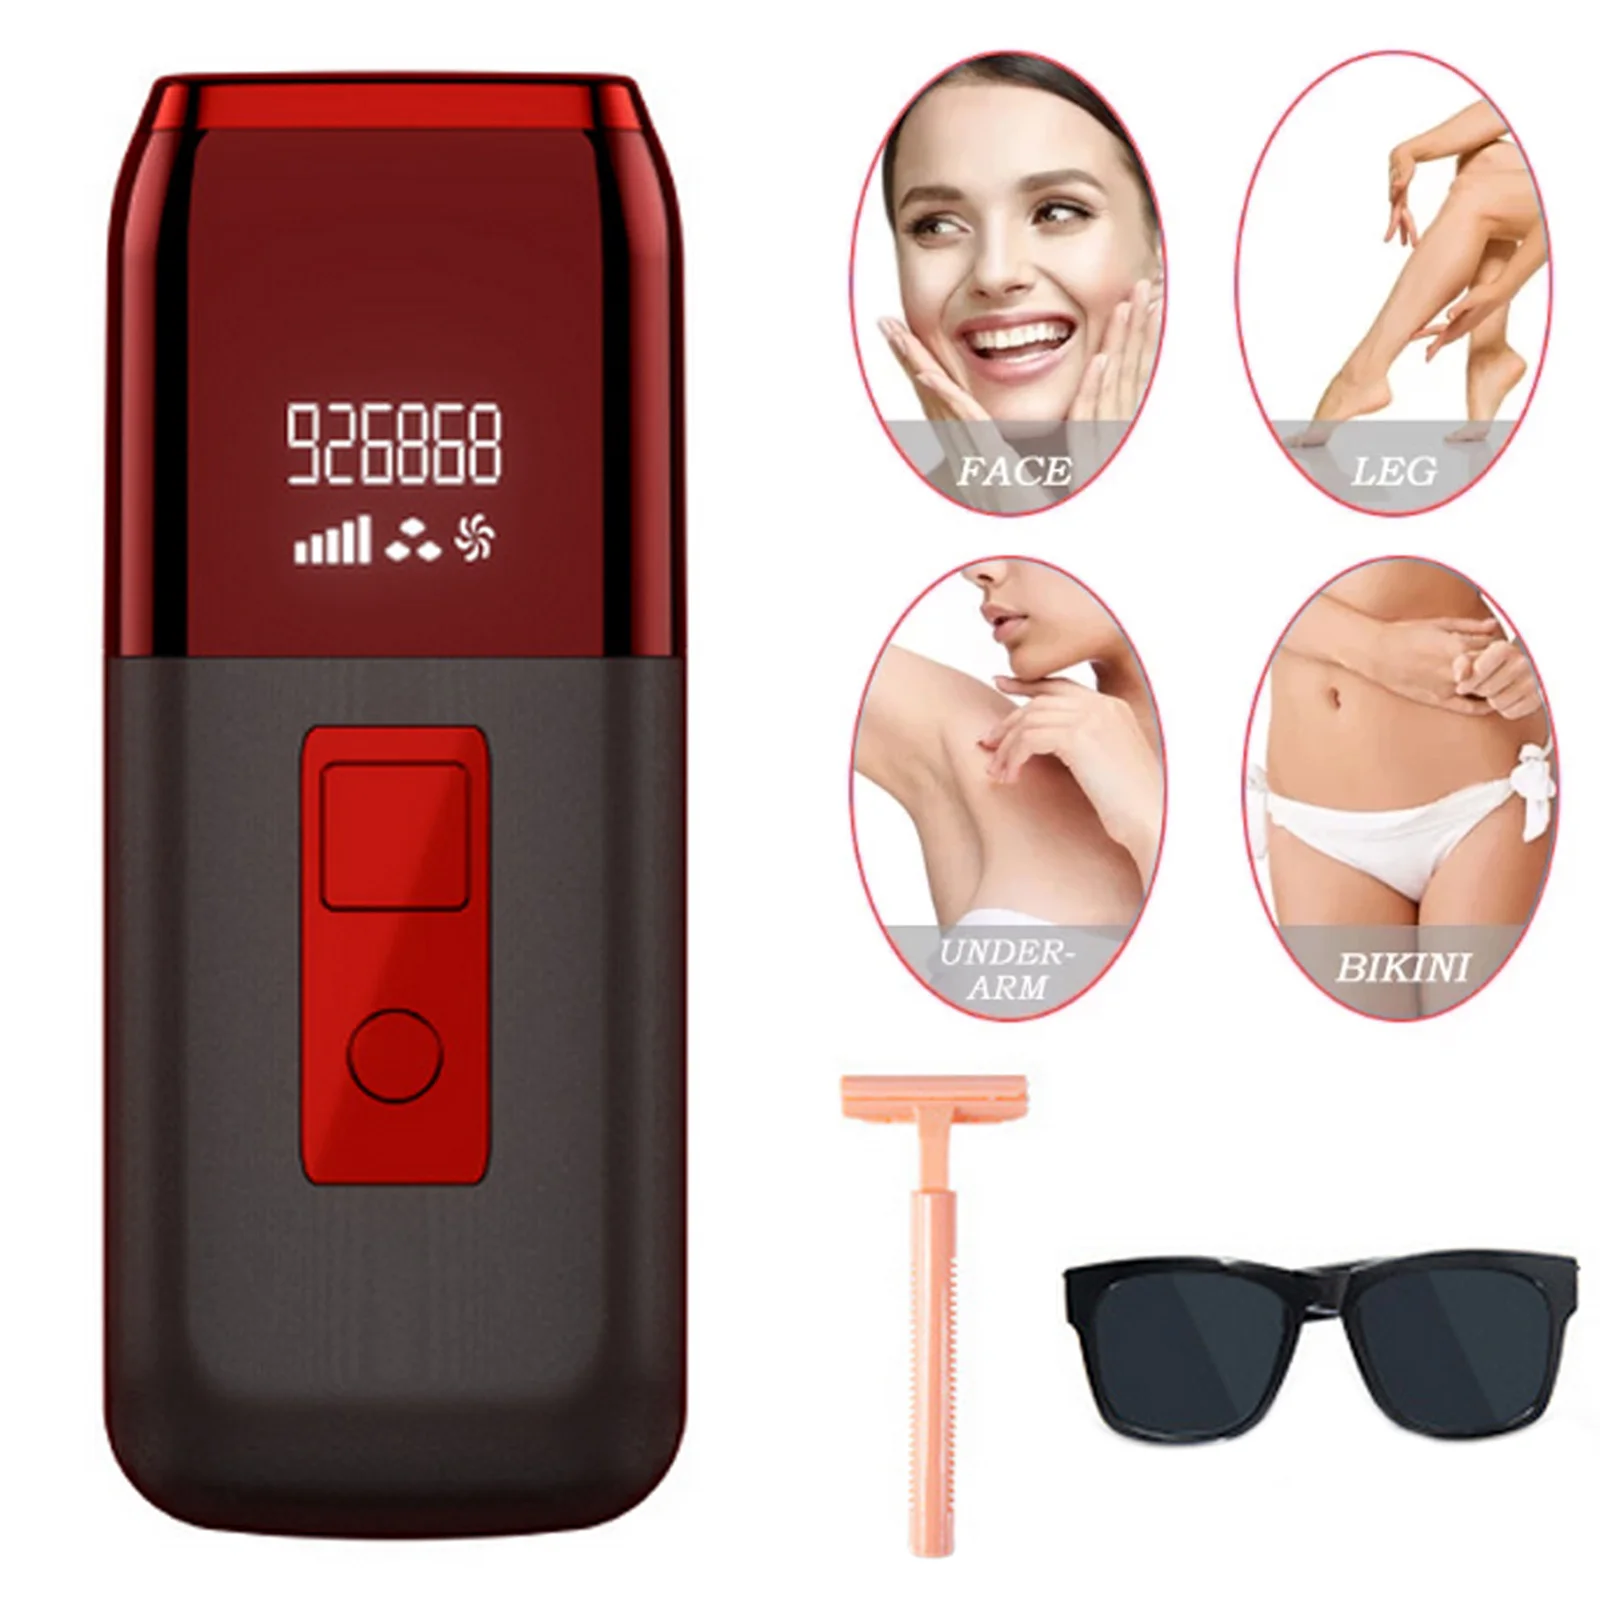 Hair Remover Portable Painless 1000000 Flashes IPL Hair Removal Device Machine with Shaver Goggles Whole Body Home Use EU Plug new type with rope anti lost men s and women s professional silicone swimming goggles lanyard earplugs